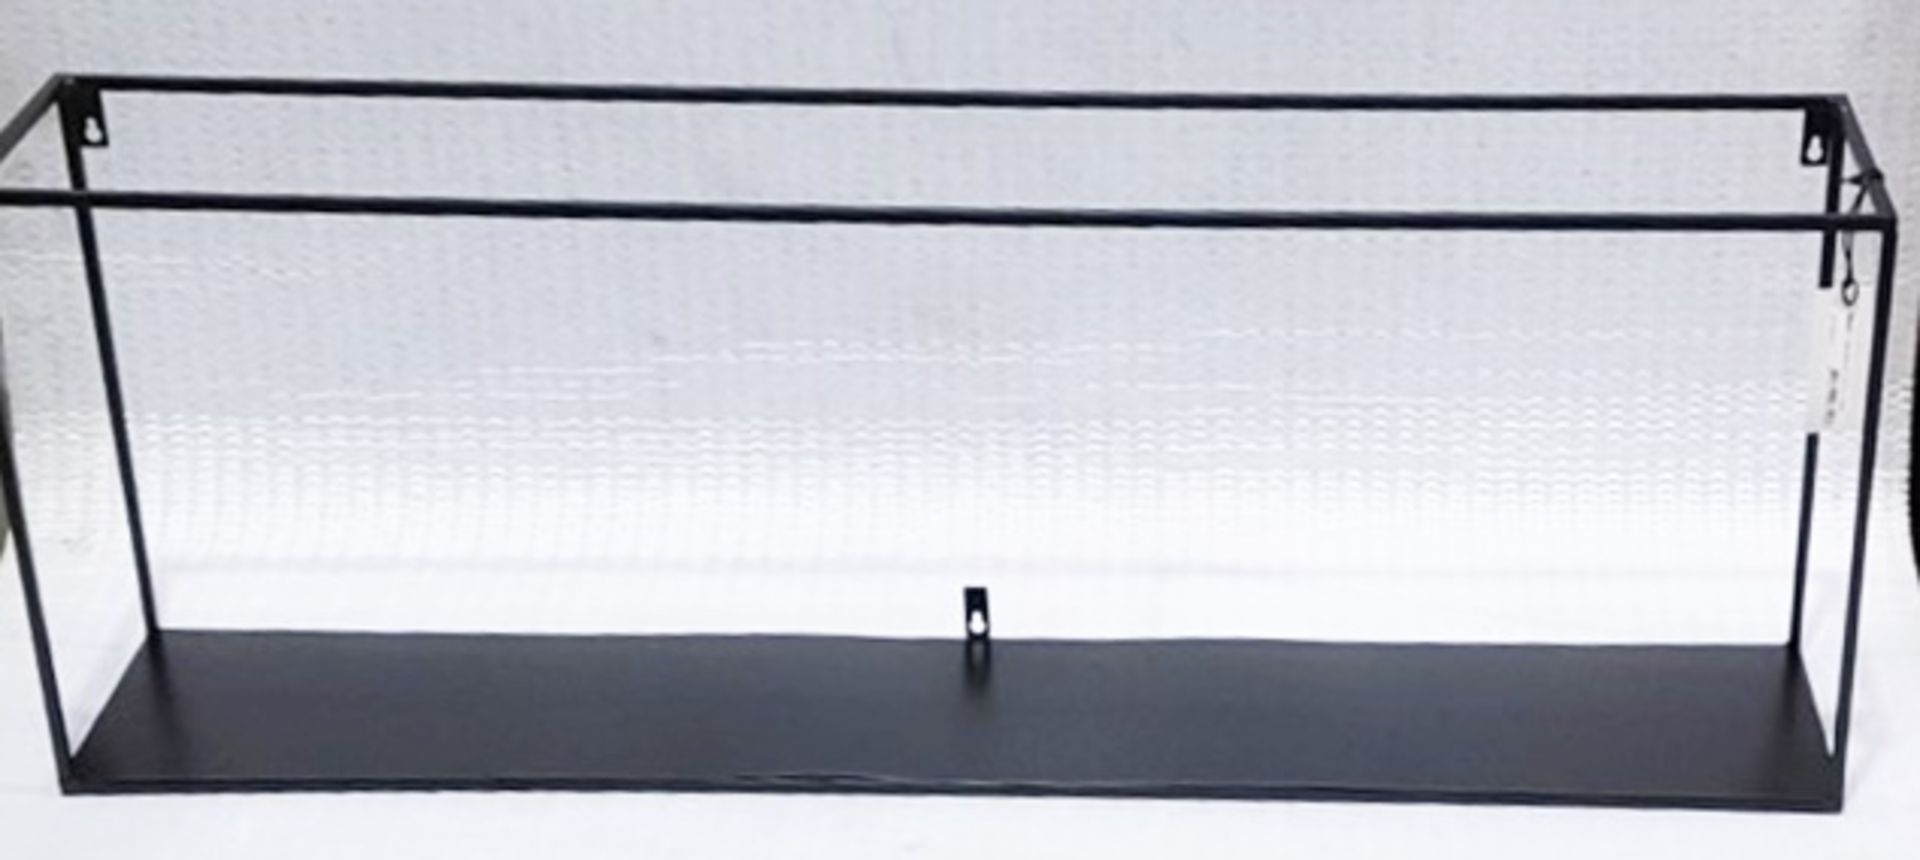 1 x WOOOD 'Meert' Black Metal Extra Storage Wall Shelf With Black Lacquered Finish 100cm - Image 5 of 7